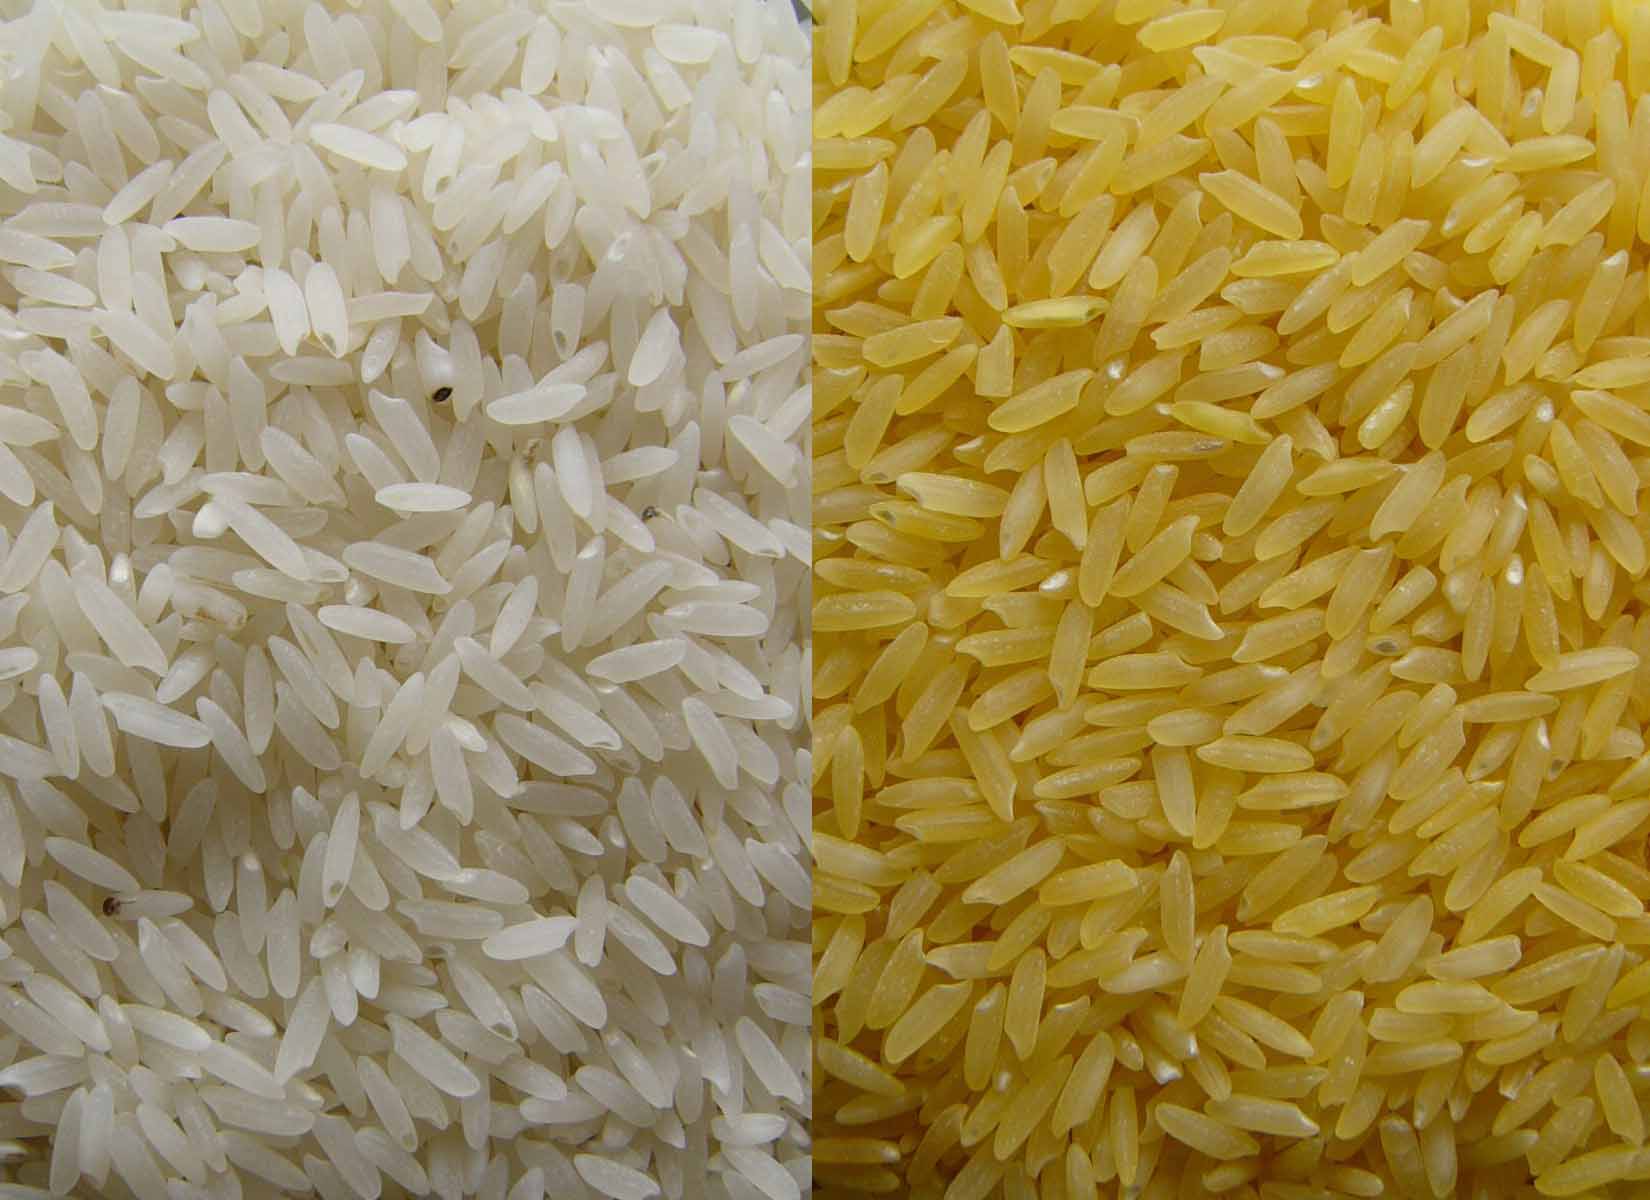 Namibia experiment Chinese rice varieties to boost quality rice production